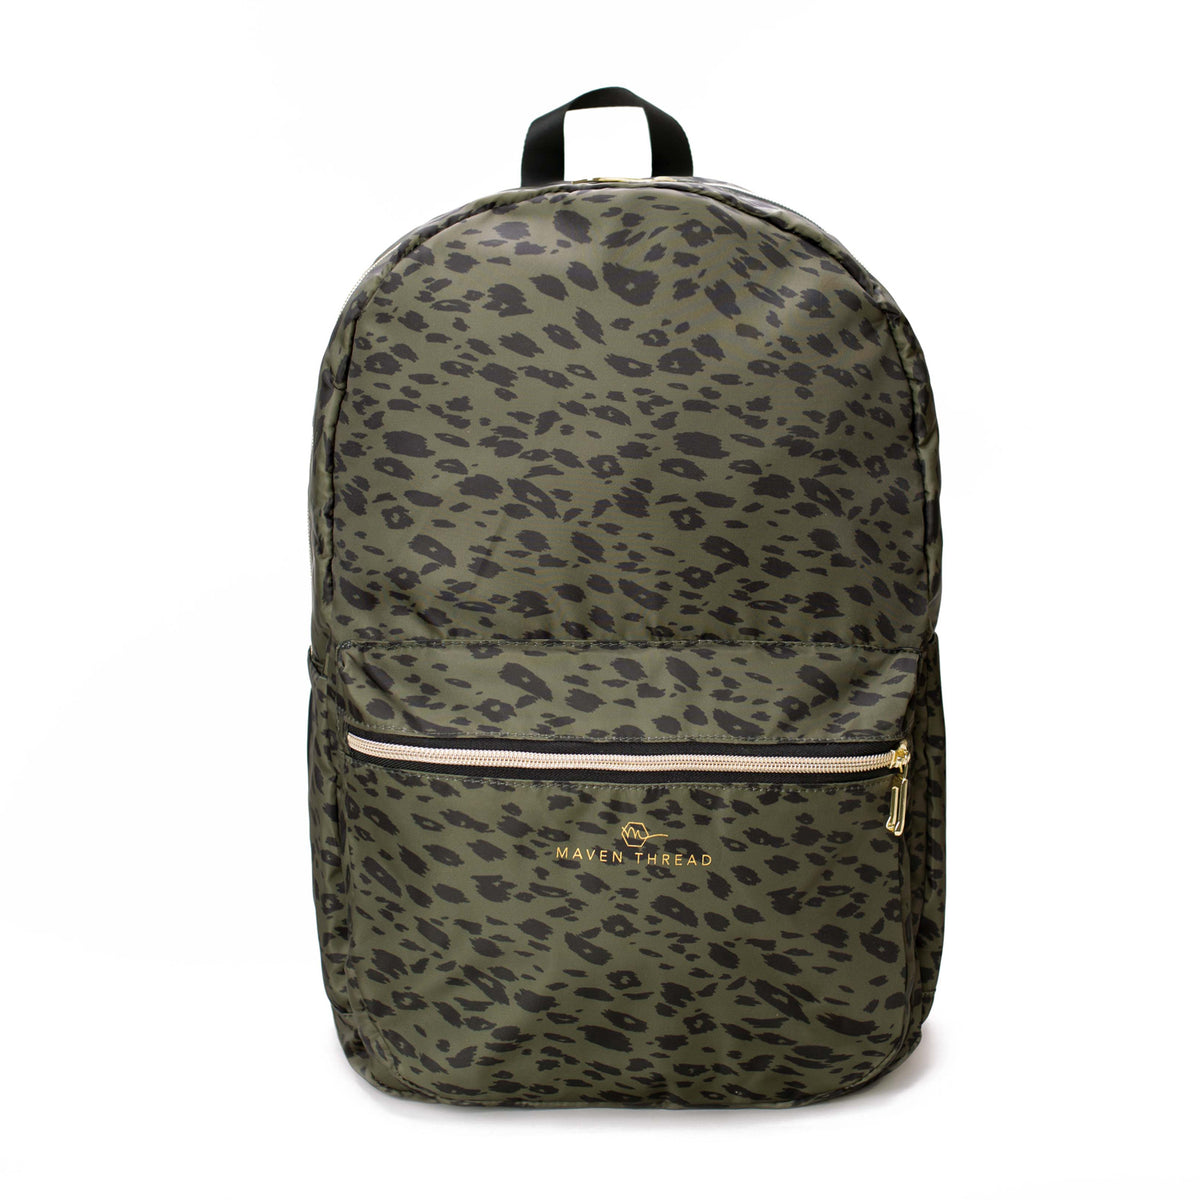 2021 best selling hot Maven Thread Classic Backpack - Grey Leopard Bags on Maven  Thread Sales